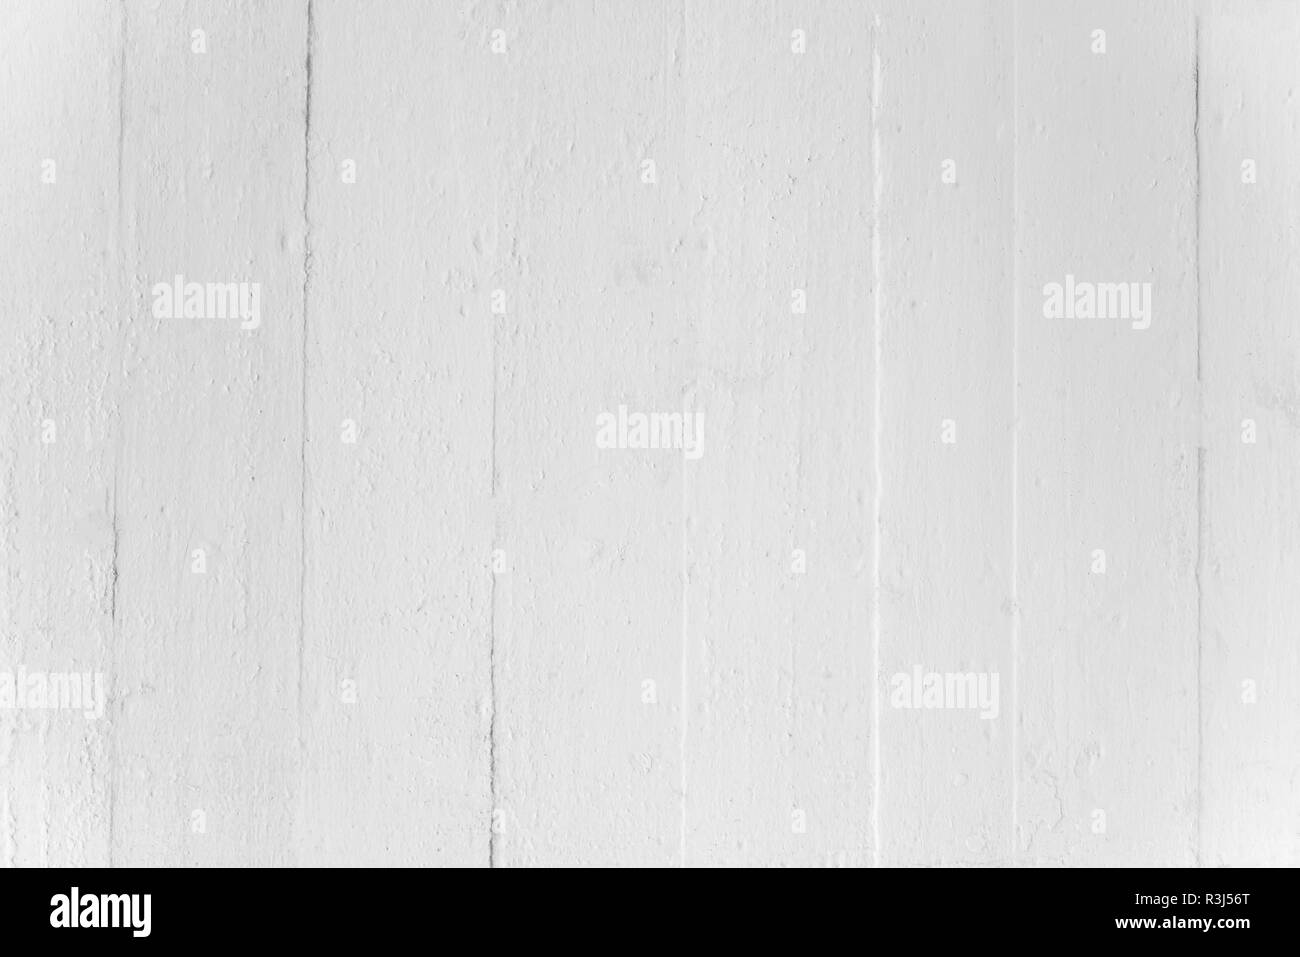 Abstract background from white concrete texture on wall. Picture for add text message. Backdrop for design art work. Stock Photo